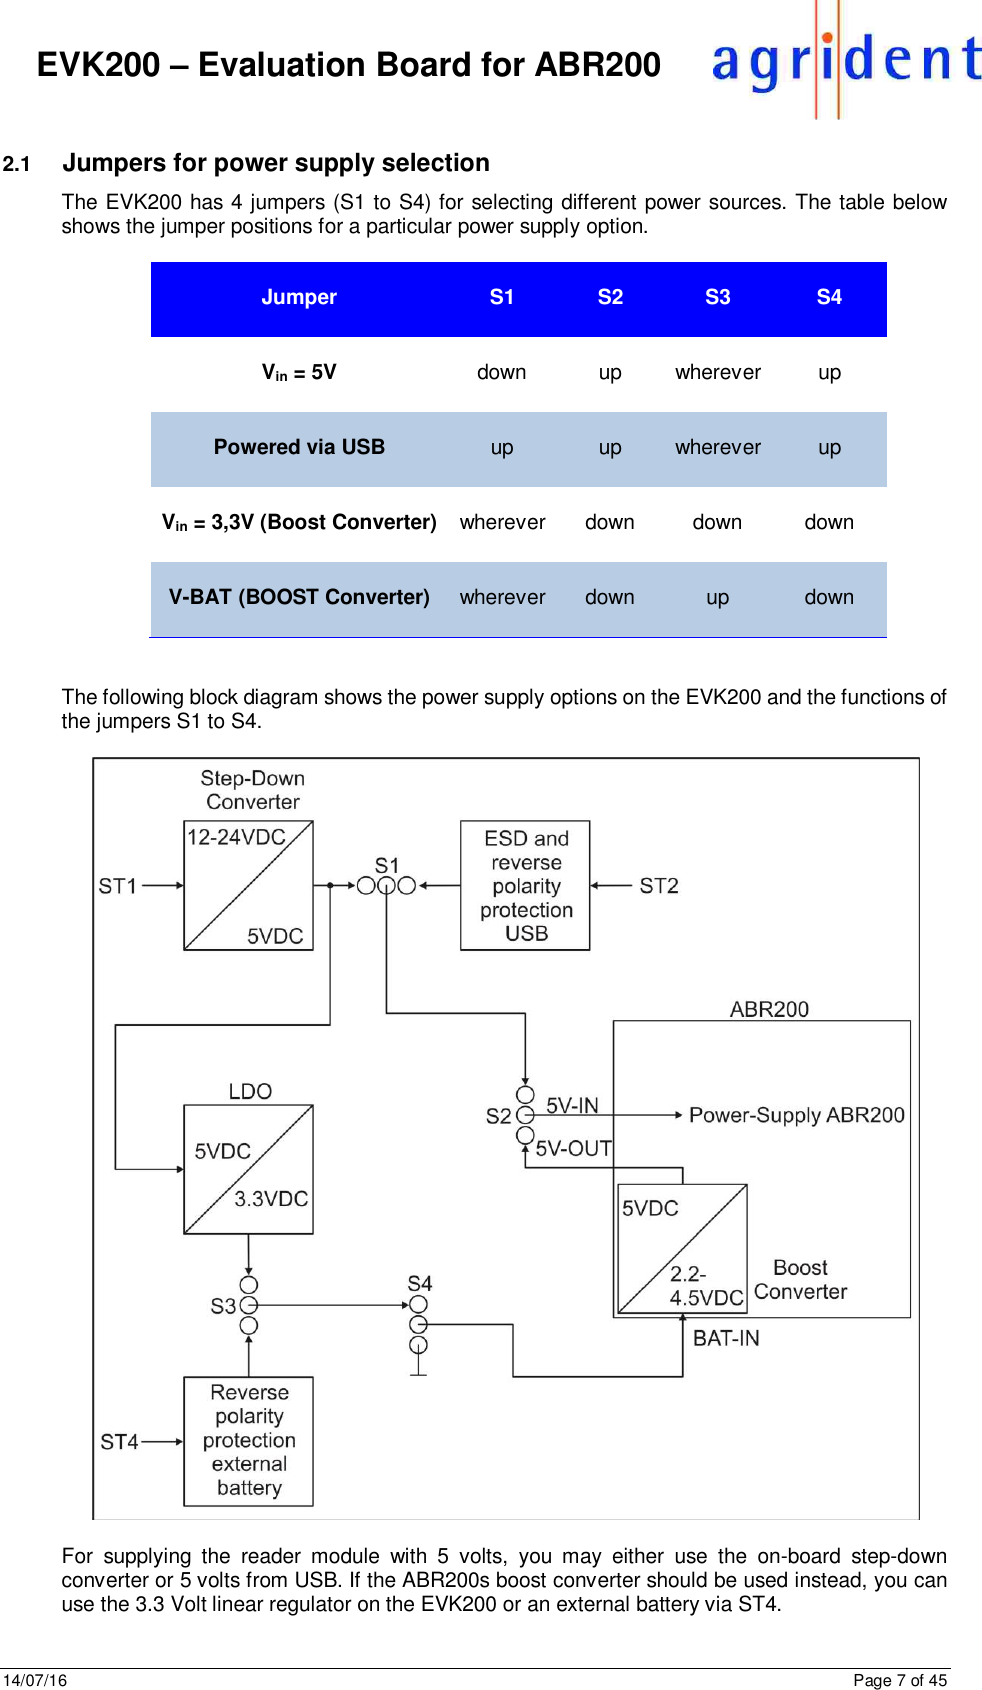 14/07/16      Page 7 of 45      EVK200 – Evaluation Board for ABR200  2.1  Jumpers for power supply selection The EVK200 has 4 jumpers (S1 to S4) for selecting different power sources. The table below shows the jumper positions for a particular power supply option.   Jumper  S1  S2  S3  S4  Vin = 5V  down  up  wherever  up  Powered via USB  up  up  wherever  up  Vin = 3,3V (Boost Converter)  wherever  down  down  down  V-BAT (BOOST Converter)  wherever  down  up  down   The following block diagram shows the power supply options on the EVK200 and the functions of the jumpers S1 to S4.    For  supplying  the  reader  module  with  5  volts,  you  may  either  use  the  on-board  step-down converter or 5 volts from USB. If the ABR200s boost converter should be used instead, you can use the 3.3 Volt linear regulator on the EVK200 or an external battery via ST4.   